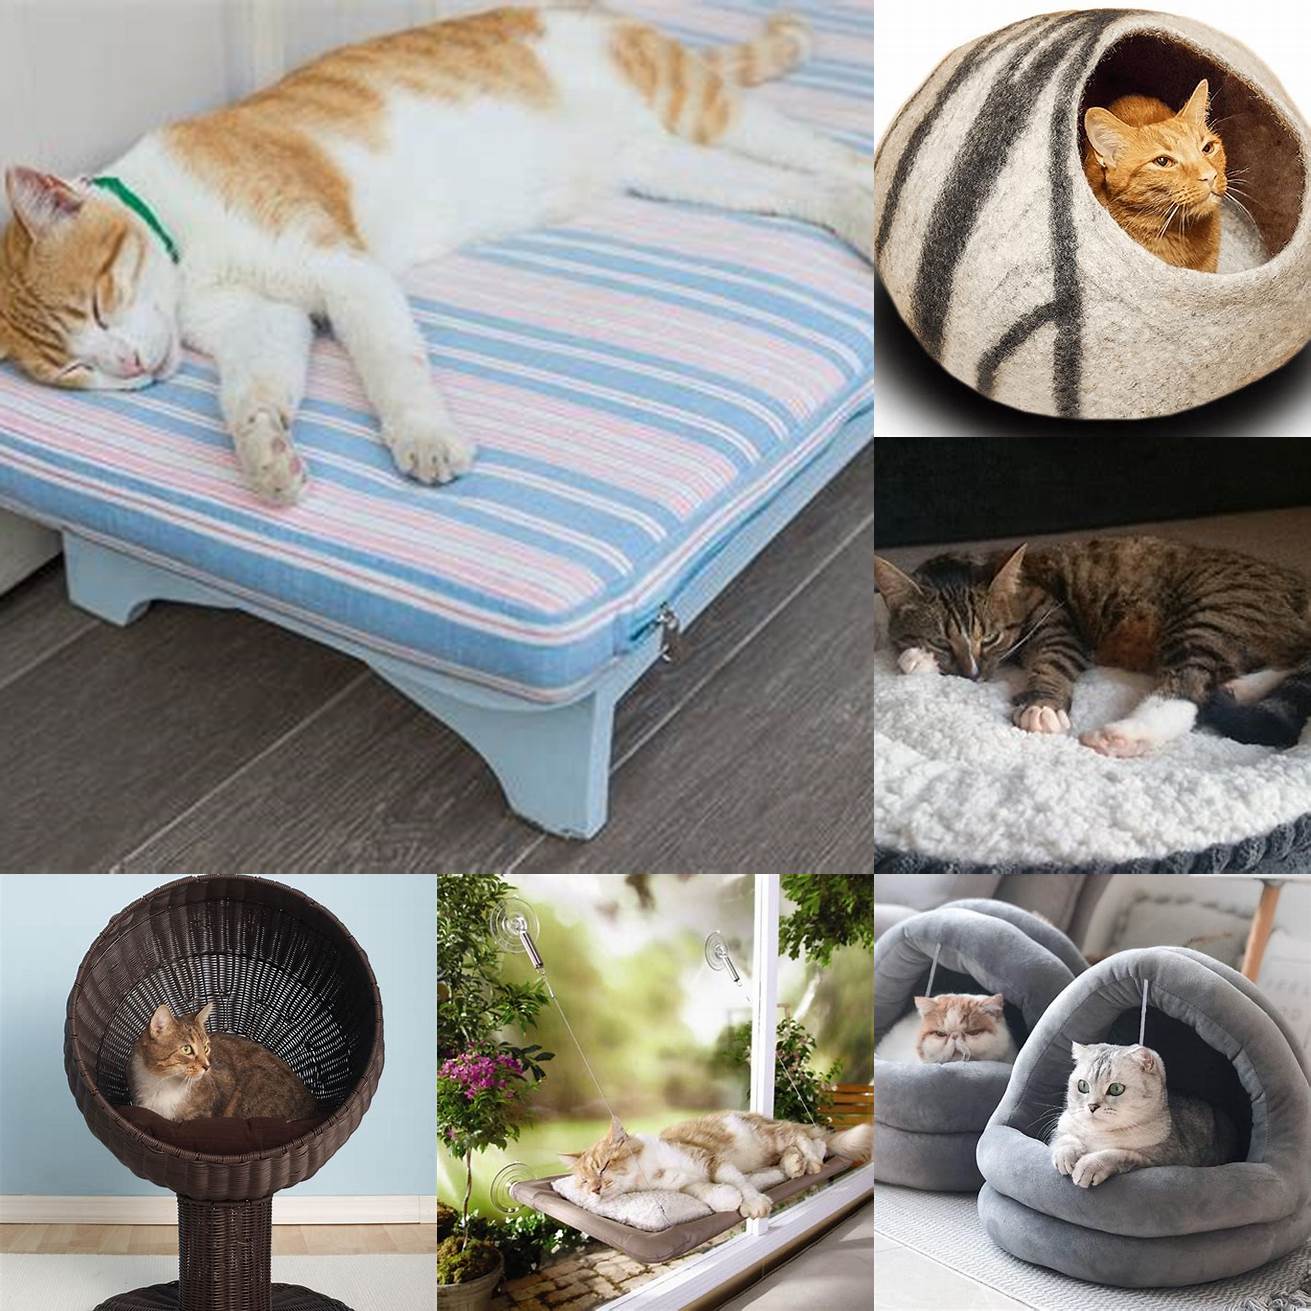 Provide a comfortable bed or resting place for your cat